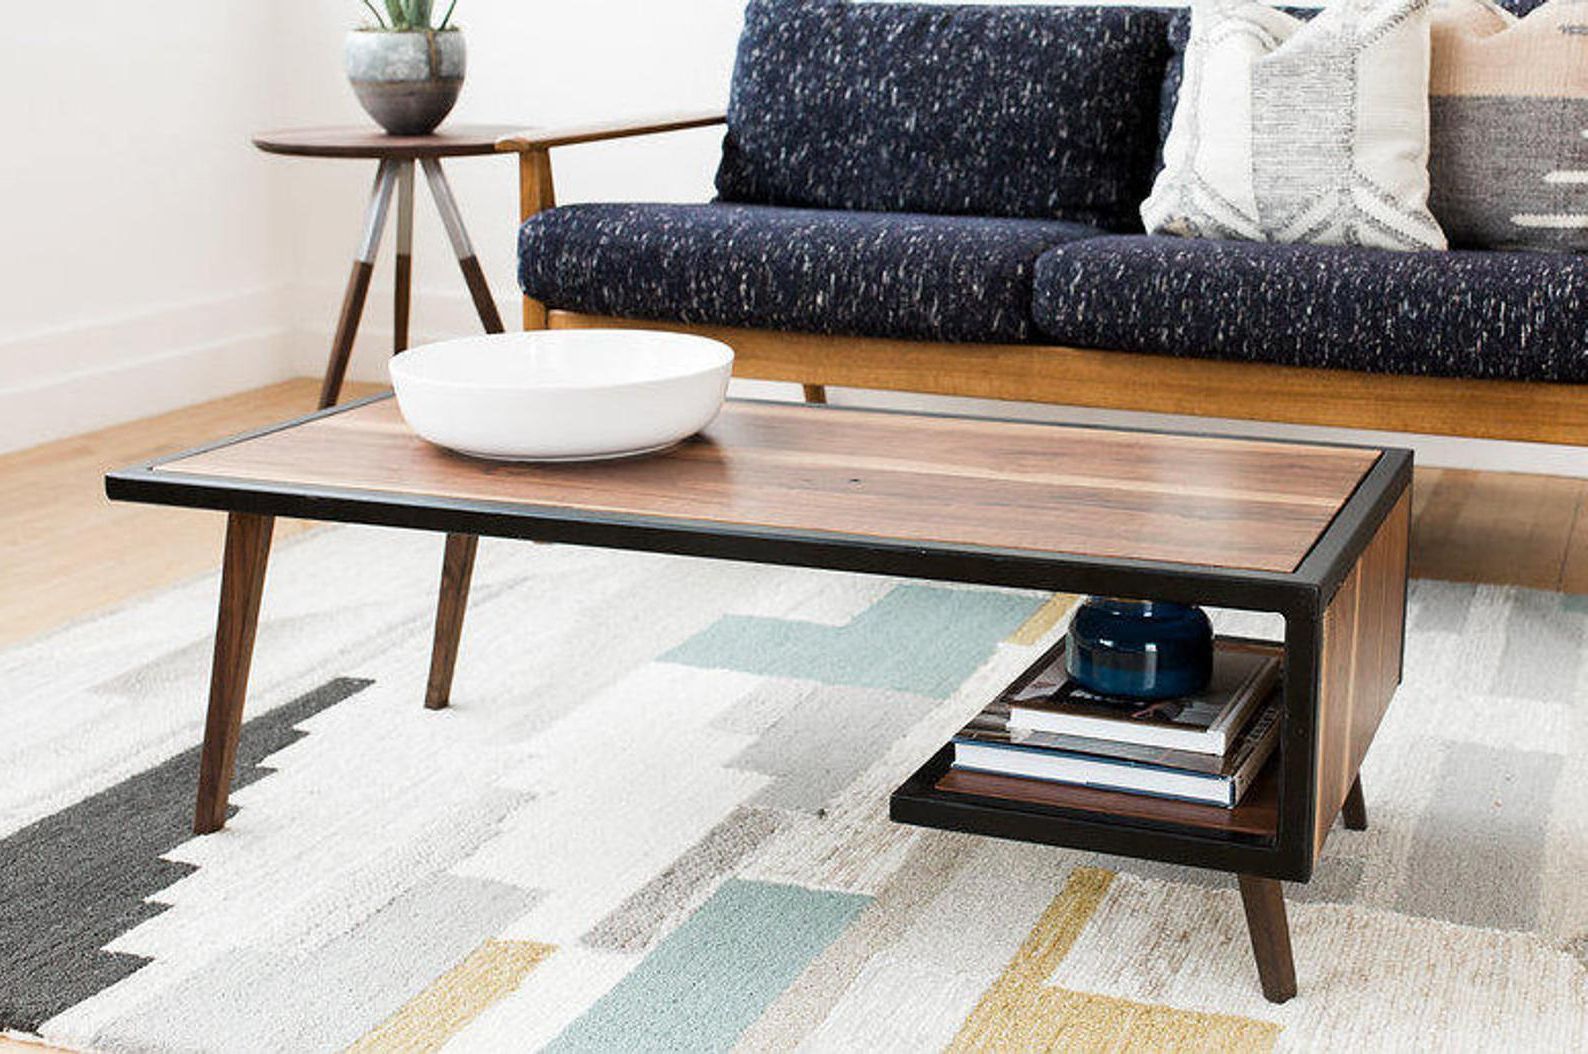 Mid Century Modern Style Coffee Tables You'll Love – Home With Mid Century Modern Coffee Tables (View 9 of 20)